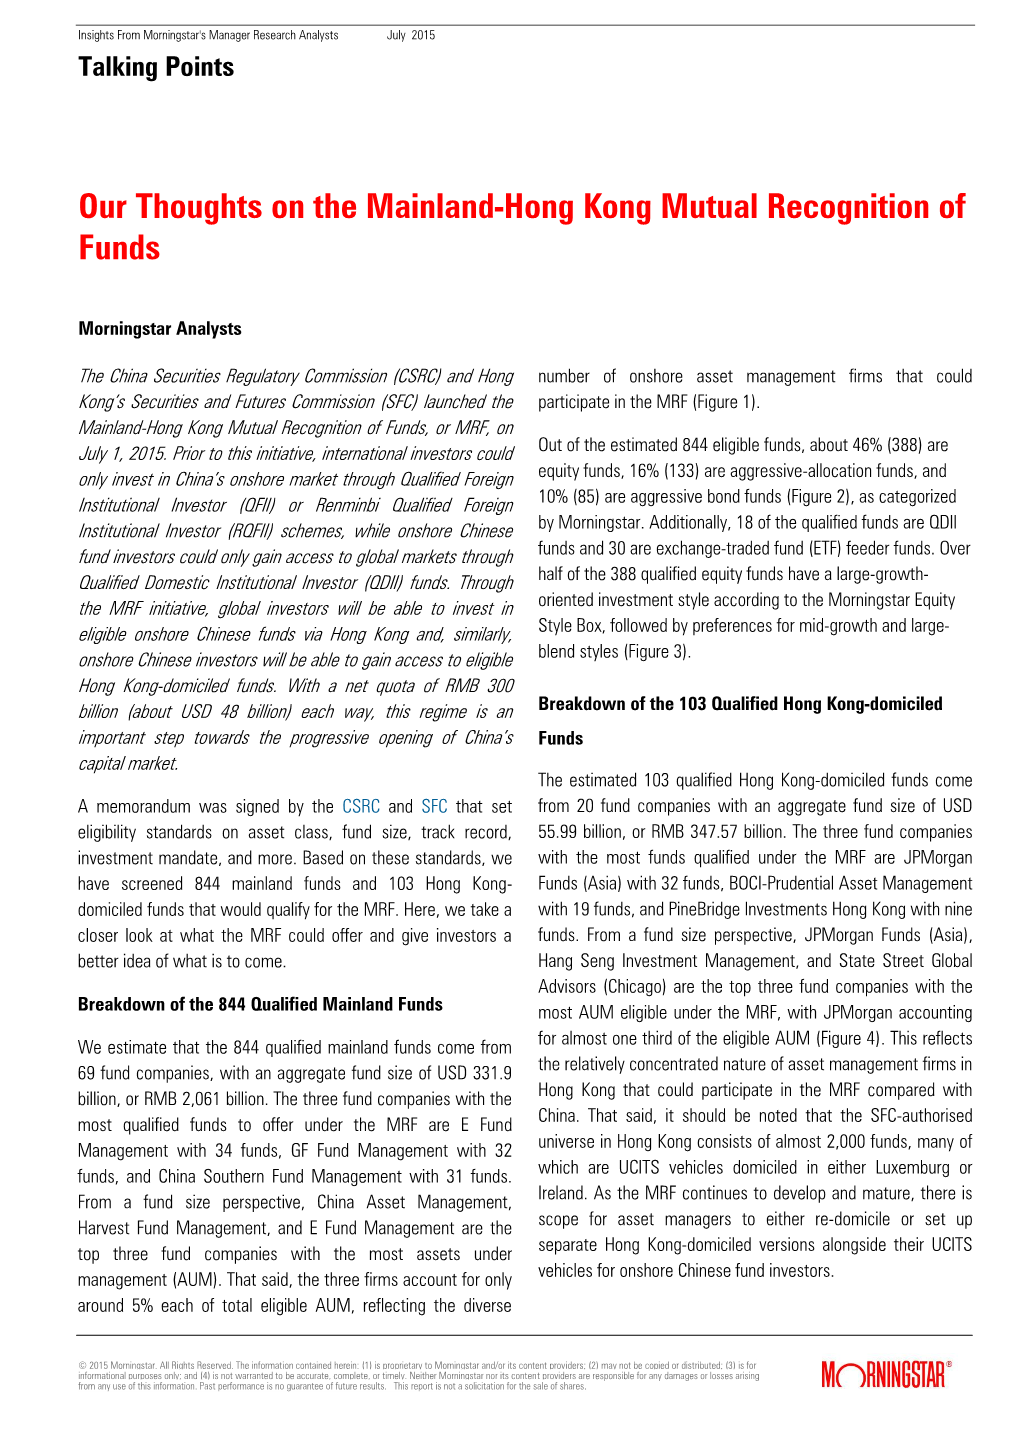 Our Thoughts on the Mainland-Hong Kong Mutual Recognition of Funds